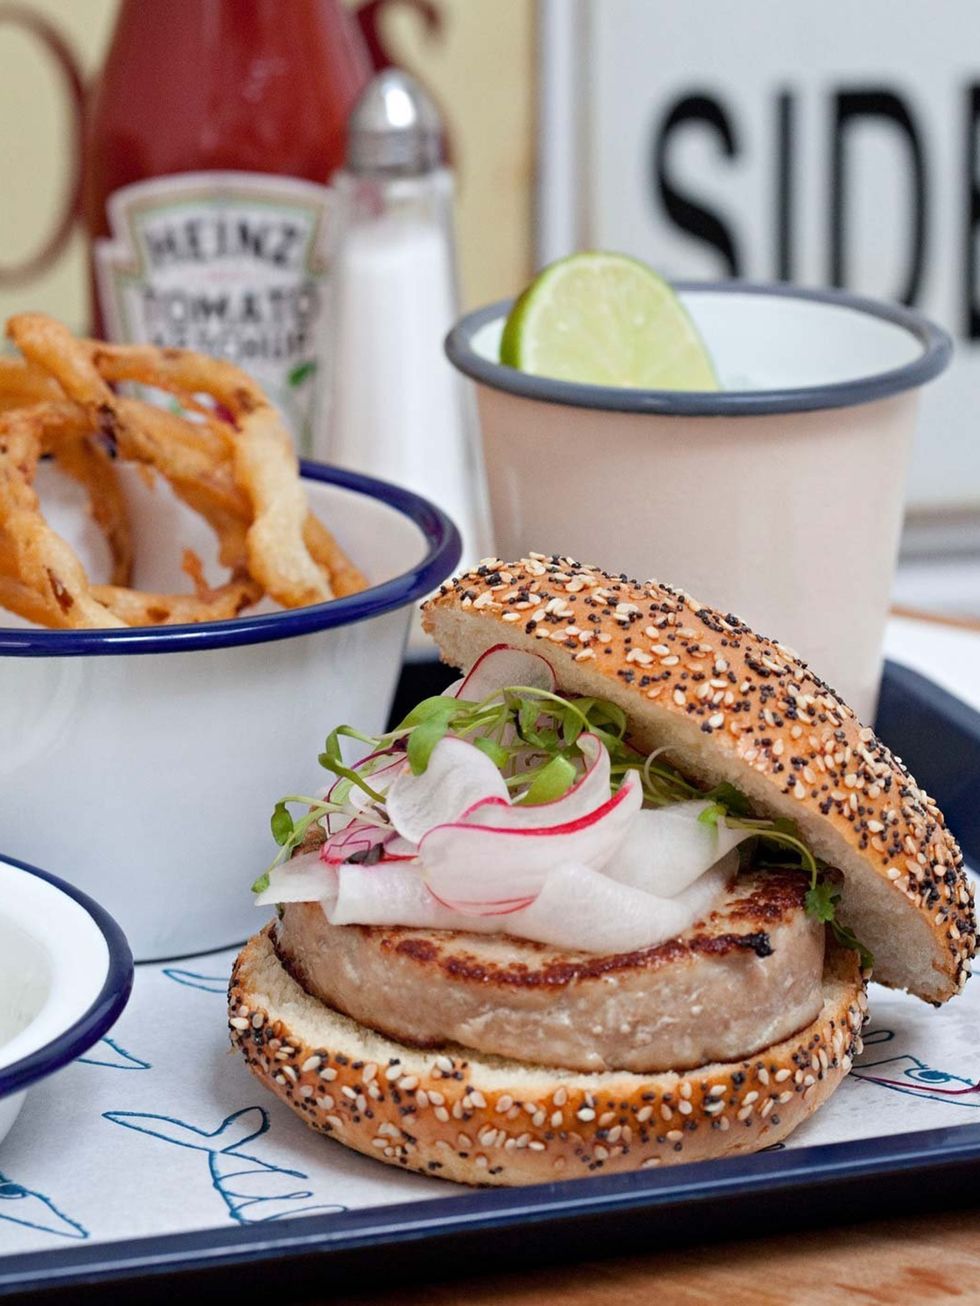 &lt;p&gt;&lt;strong&gt;Food: FISHbone Pop Up&lt;/strong&gt;&lt;/p&gt;&lt;p&gt;Opening next week, FISHbone is a pop-up diner situated at &lt;em&gt;Kensington Place &lt;/em&gt;which offers a range of unique fish and seafood dishes including Scallopdog with 